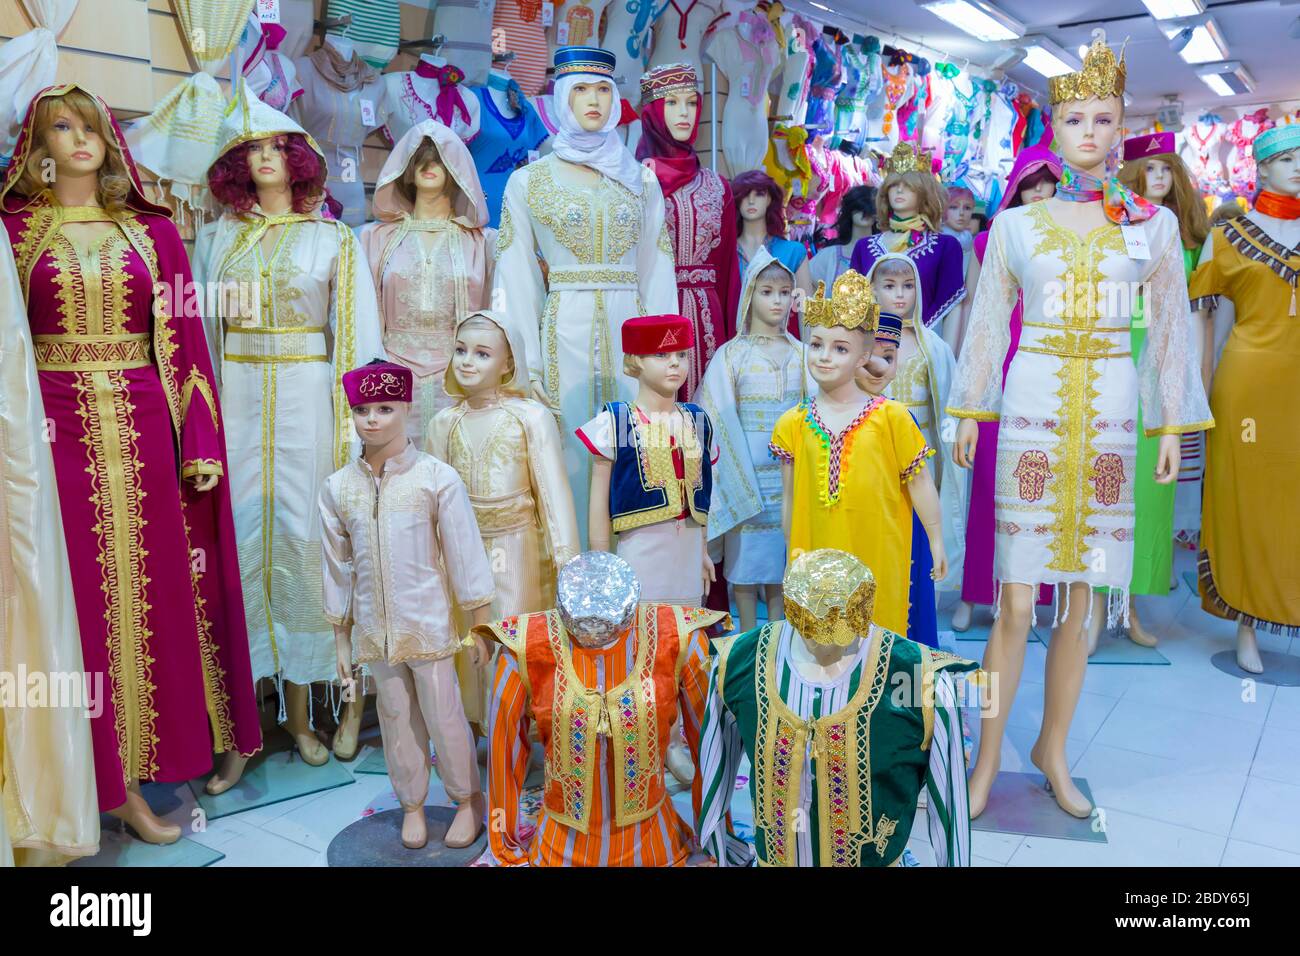 Dummies with traditional clothes in a shop. Tunis city. Tunisia, Africa. Stock Photo